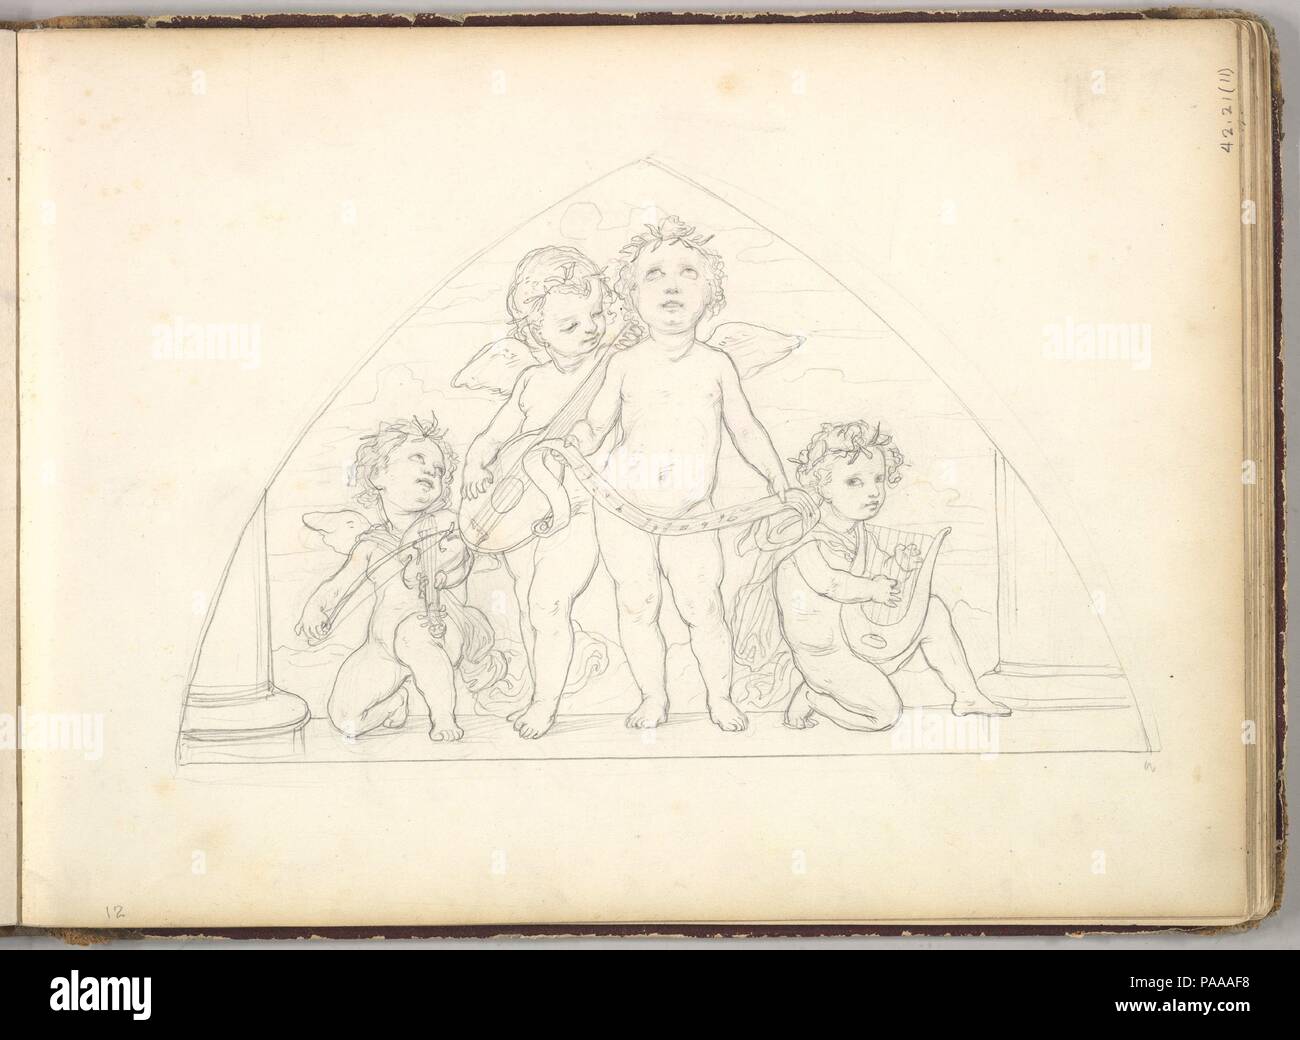 Four Musical Putti  (in Sketch Book With Drawings on Twenty-six Leaves). Artist: Frederic, Lord Leighton (British, Scarborough 1830-1896 London). Dimensions: Sheet (page): 7 7/8 x 10 7/8 in. (20 x 27.6 cm). Date: ca. 1849. Museum: Metropolitan Museum of Art, New York, USA. Stock Photo